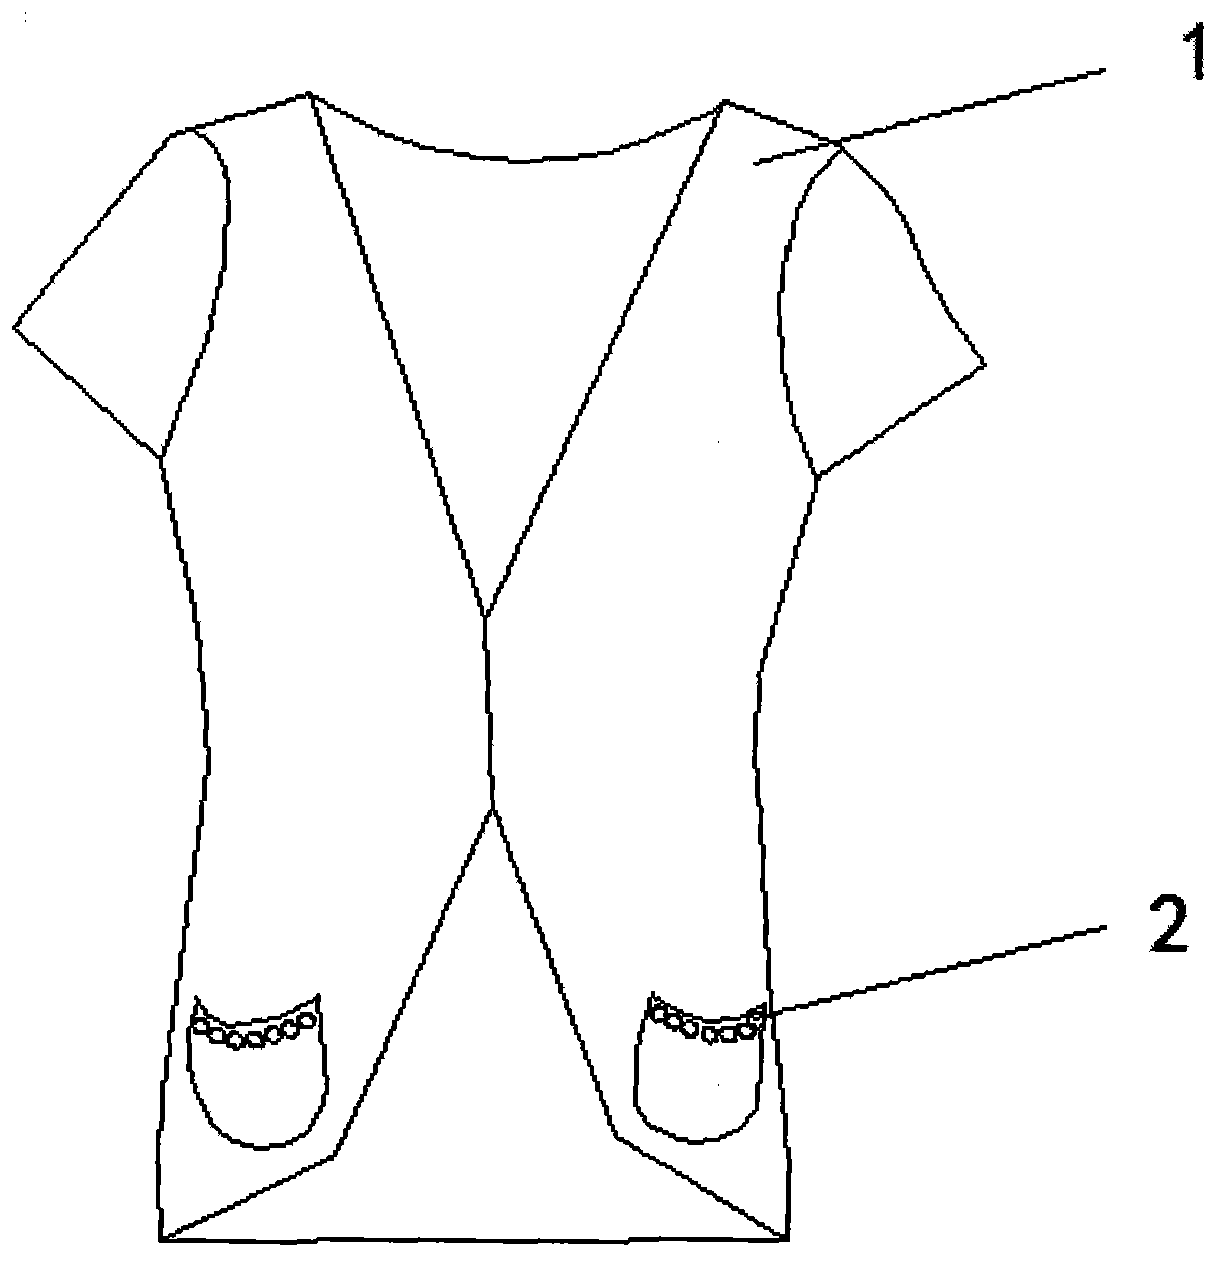 Garment capable of improving air permeability of fabric and provided with pockets with colored pearls